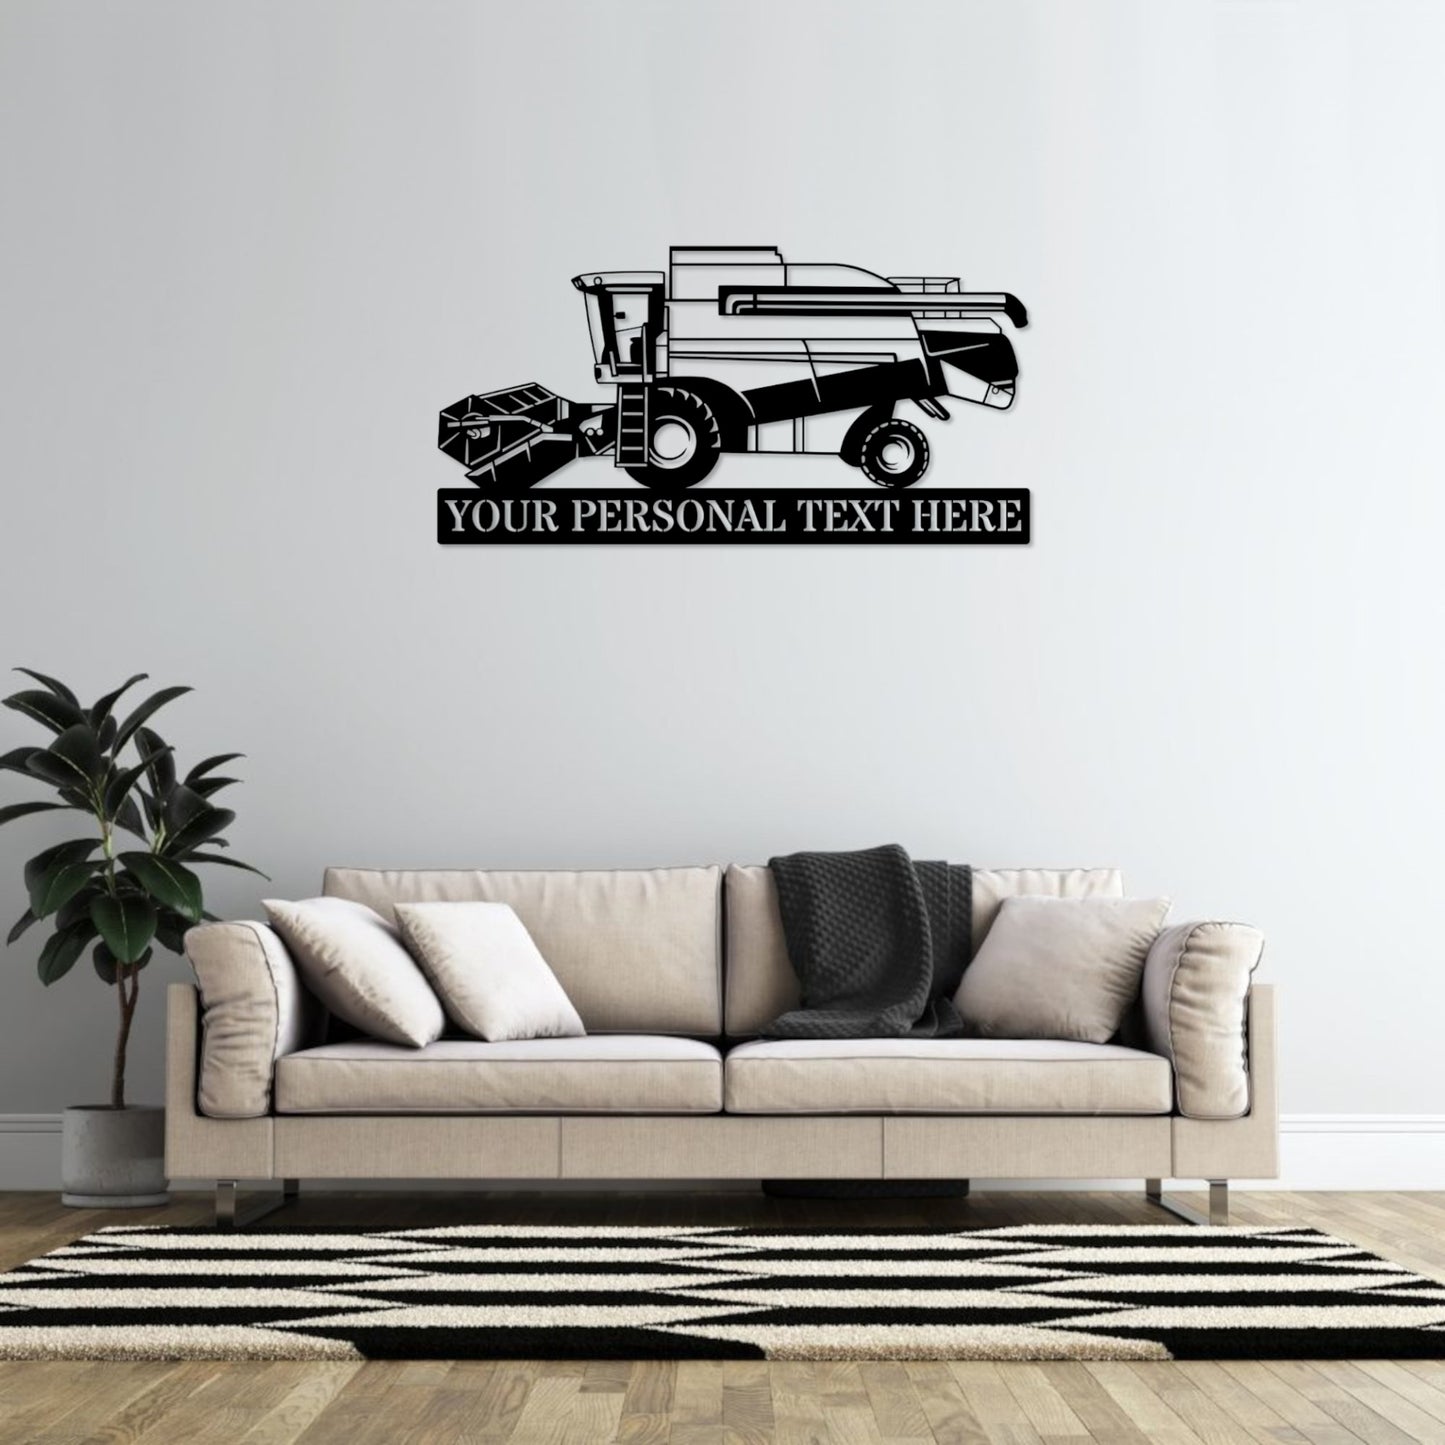 Personalized Combine Harvesting Machine Metal Sign. Custom Farm Wall Decor Gift. Farmhouse Wall Haning. Barn Decor. Agricultural Steel Sign